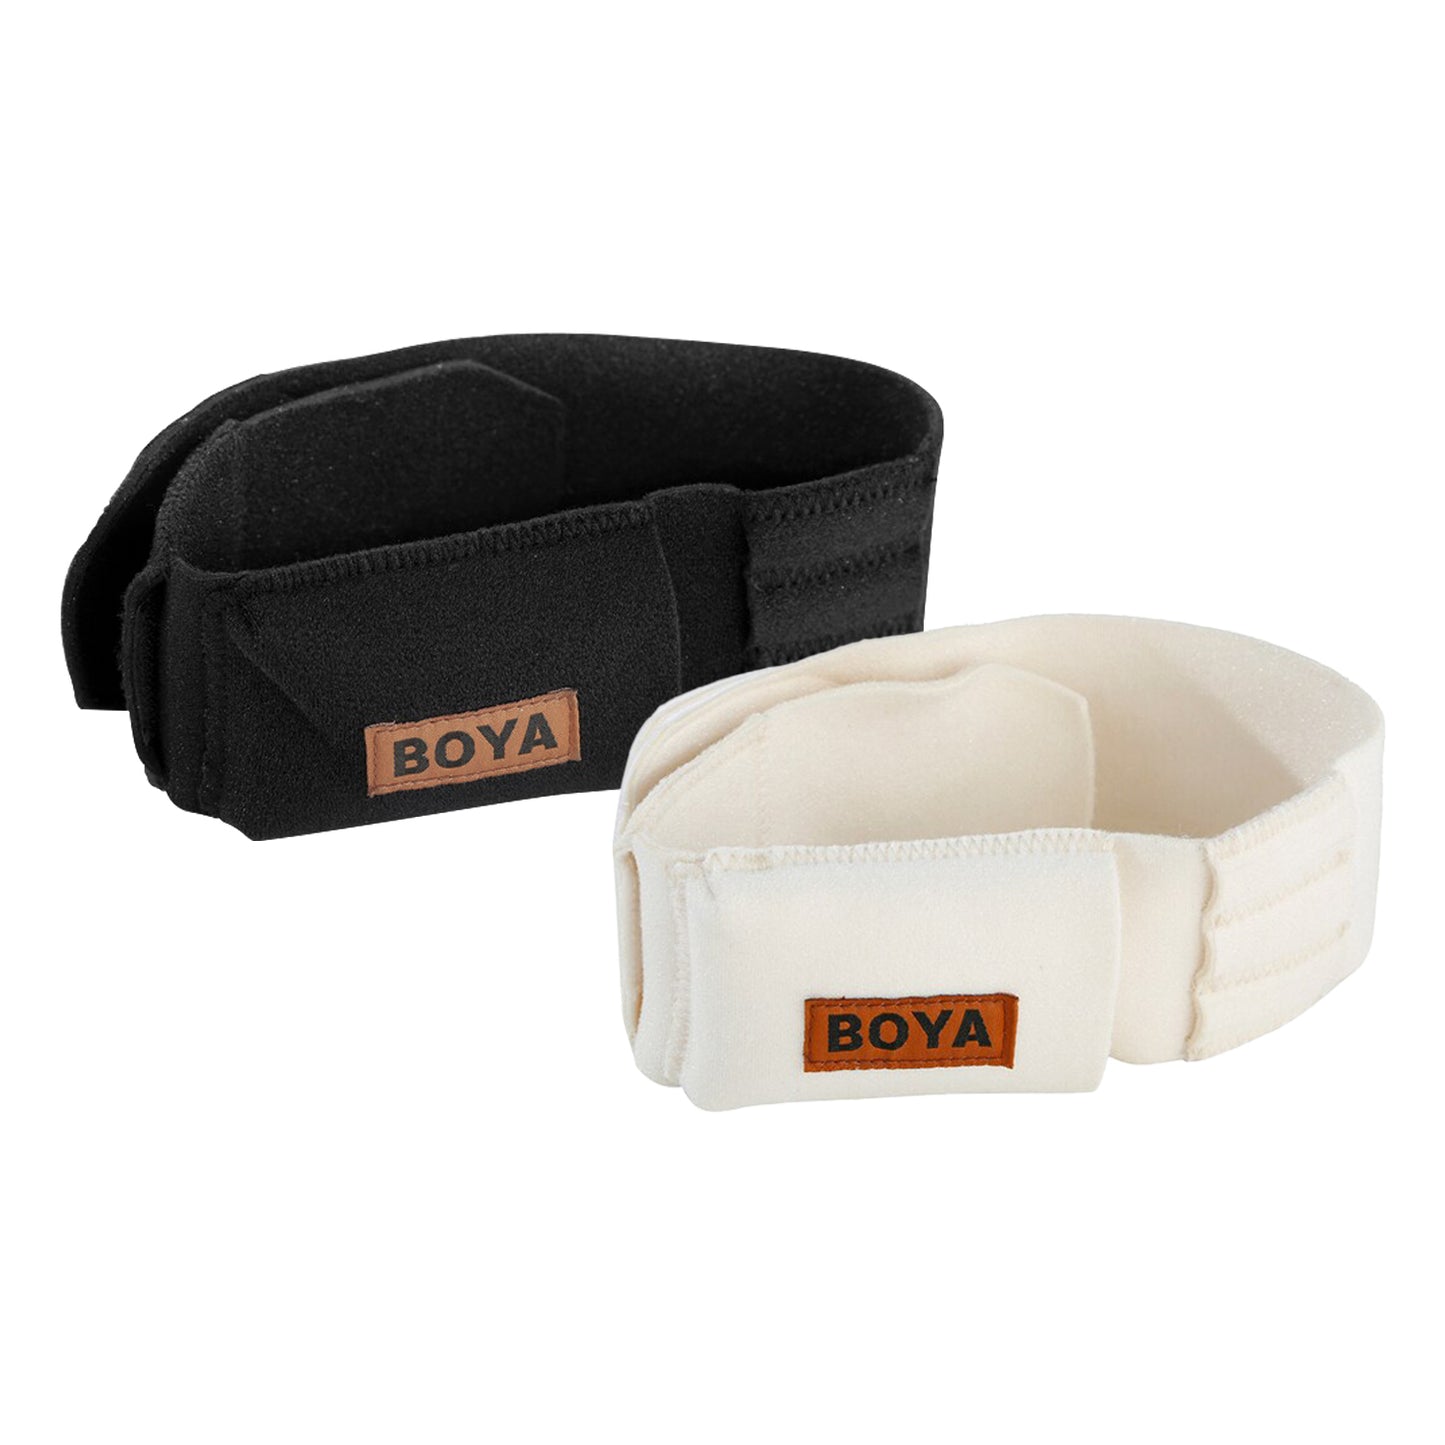 Boya BY-MB2 Microphone Belt for Wireless Transmitter Microphone Perfect use for Interviews, Vlogging and Stage Show